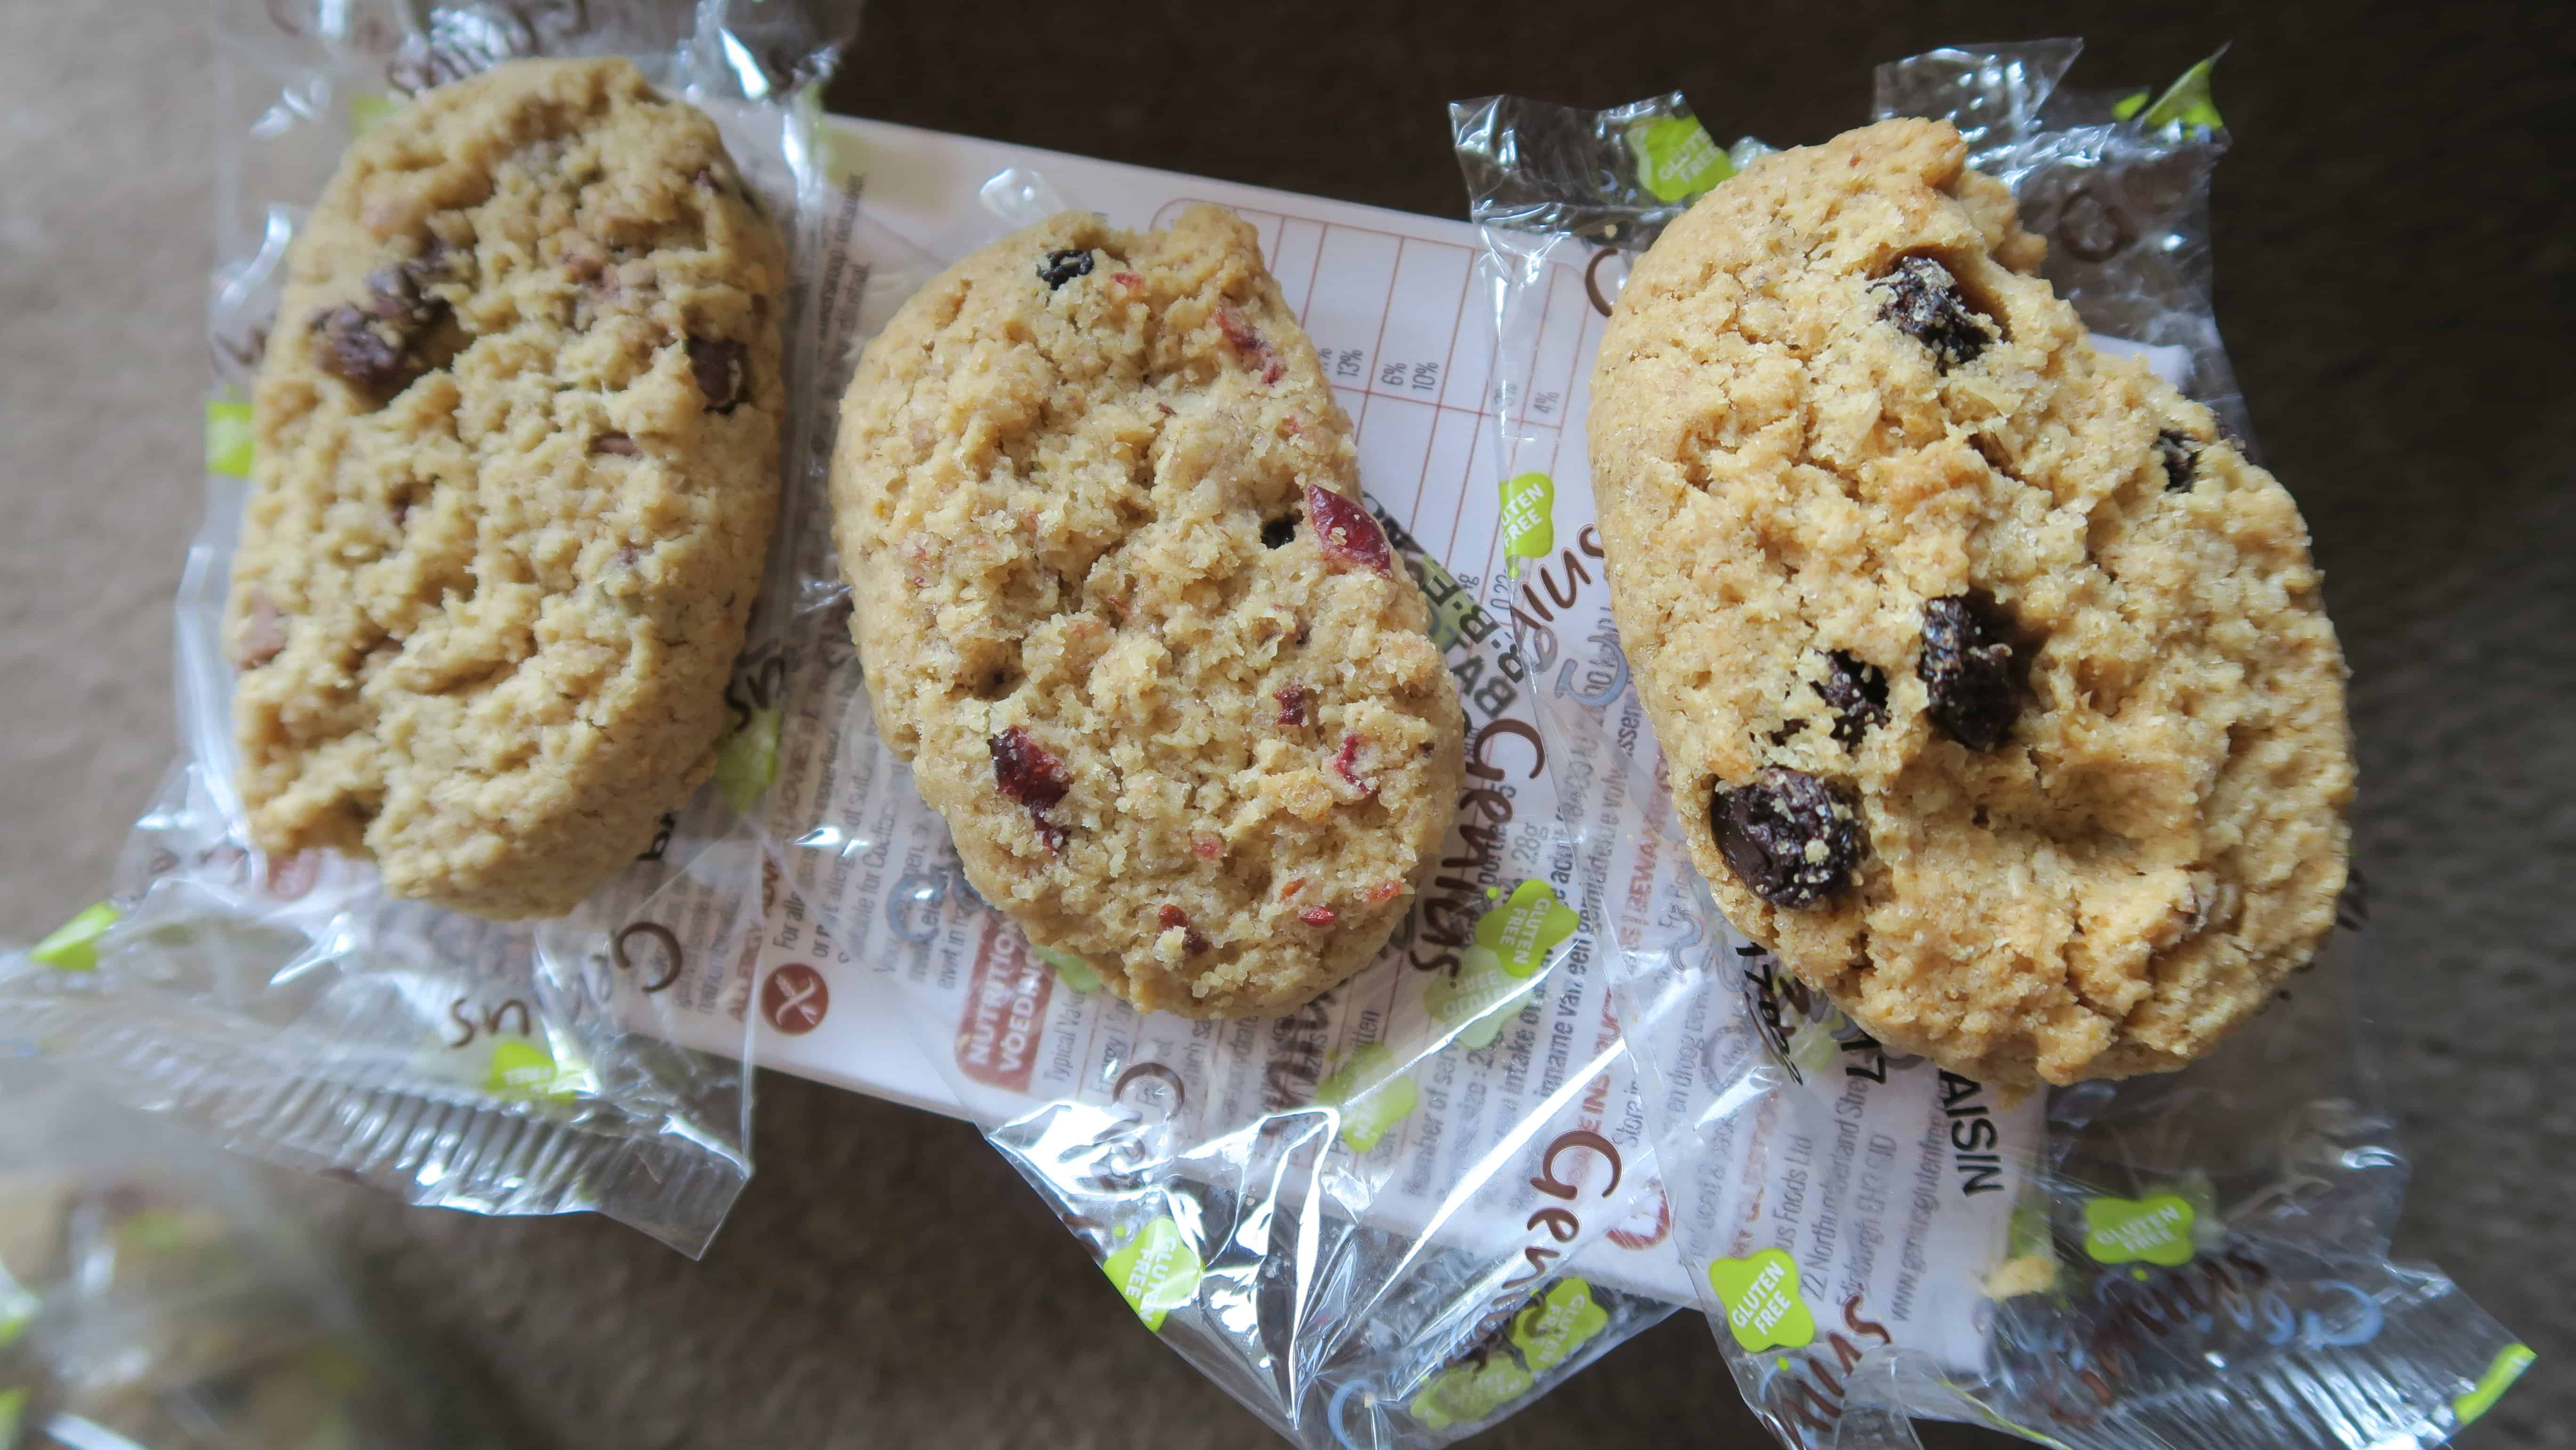 L-R: Chocolate chip, cranberry, and honey & raisin gluten free breakfast bakes from Genius Foods.